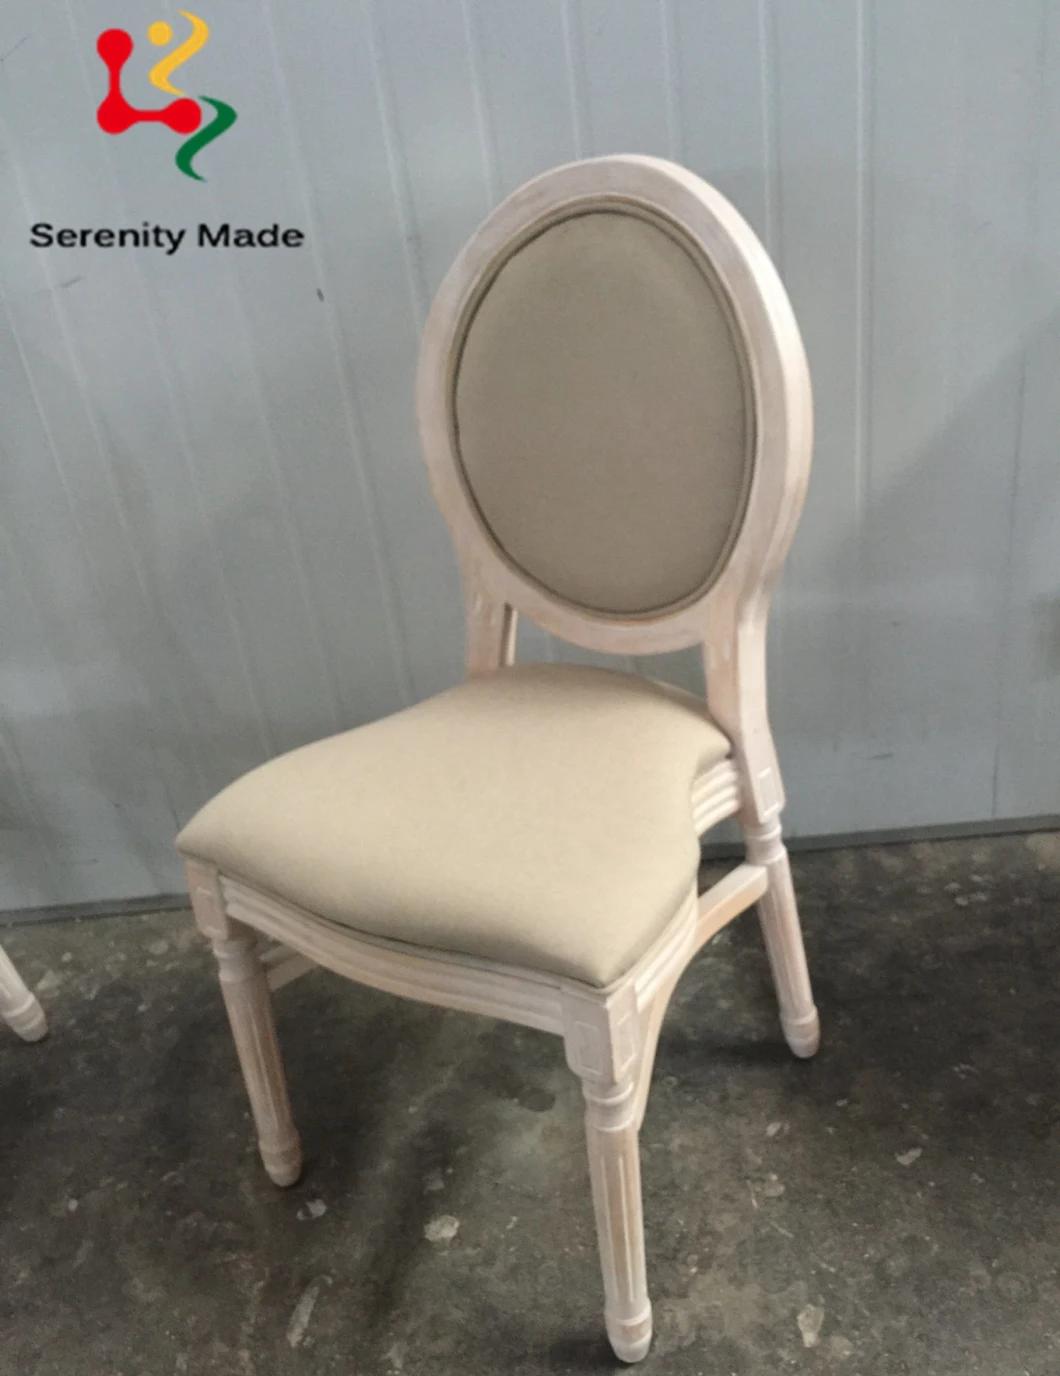 Antique Solid Wood Dining Chair for Event Hire Wedding Luxury Stackable Banquet Chair